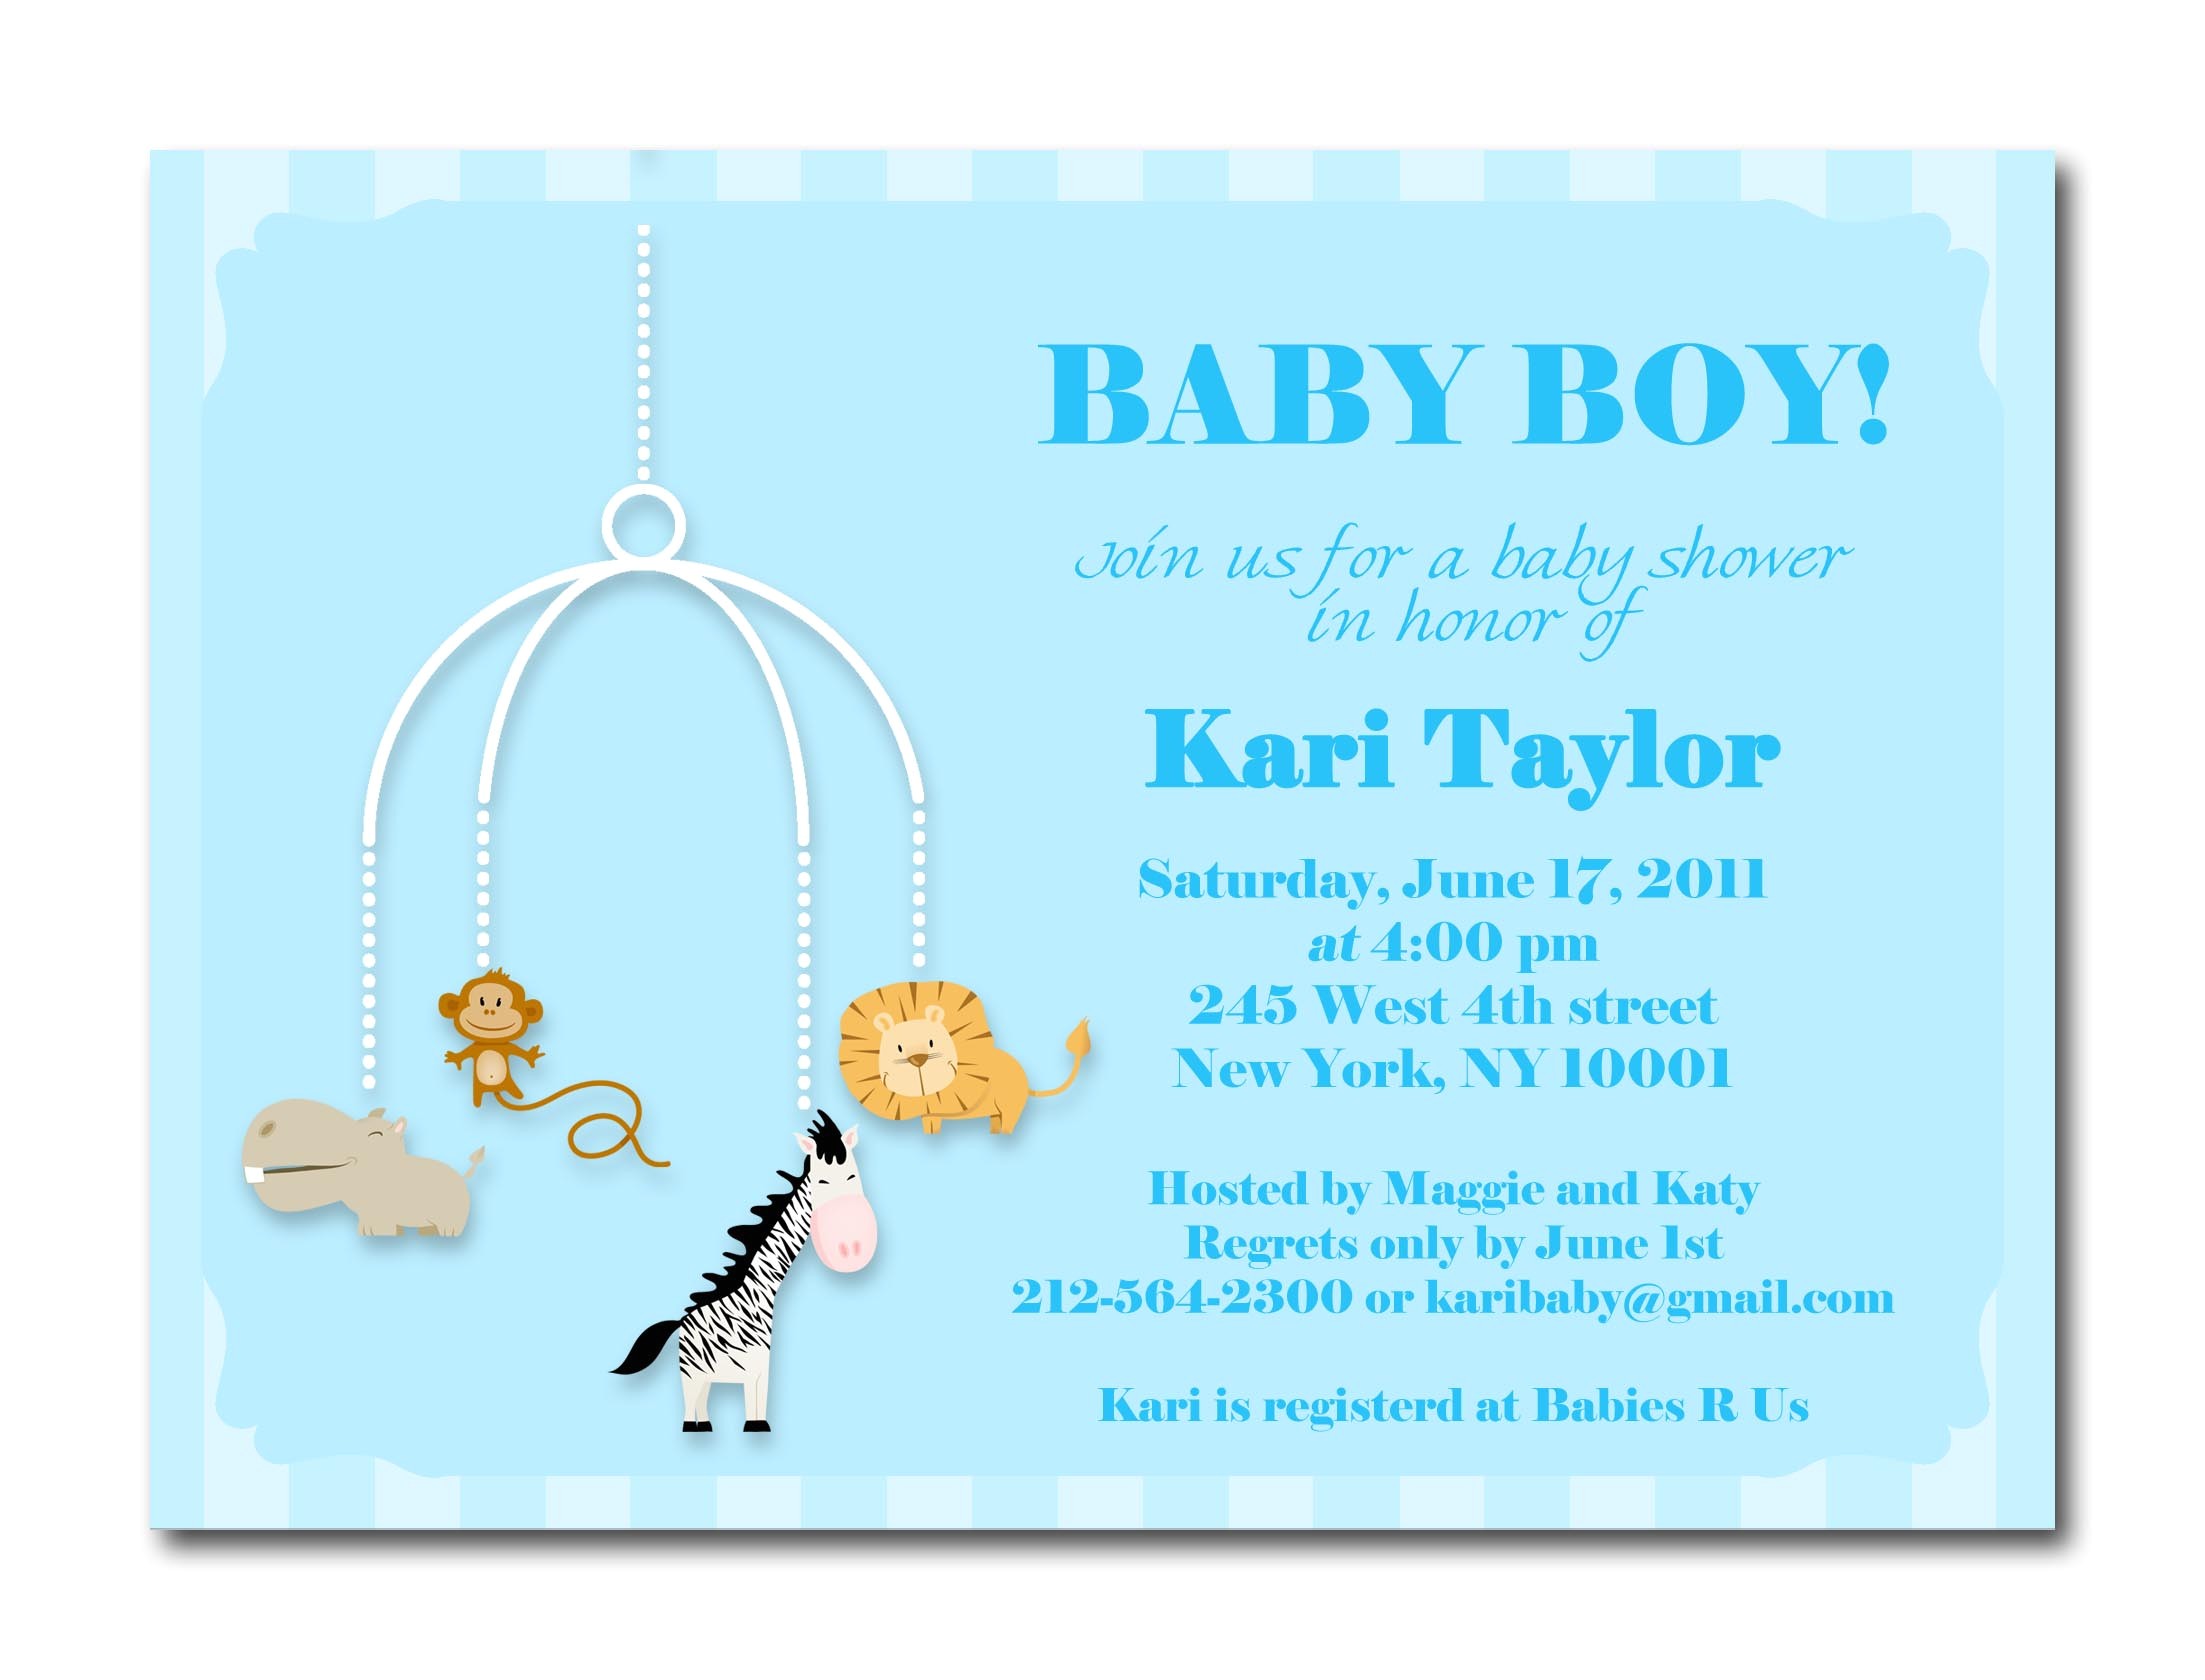 Baby Showers Invitation Cards Template Baby Shower Invitation Cards